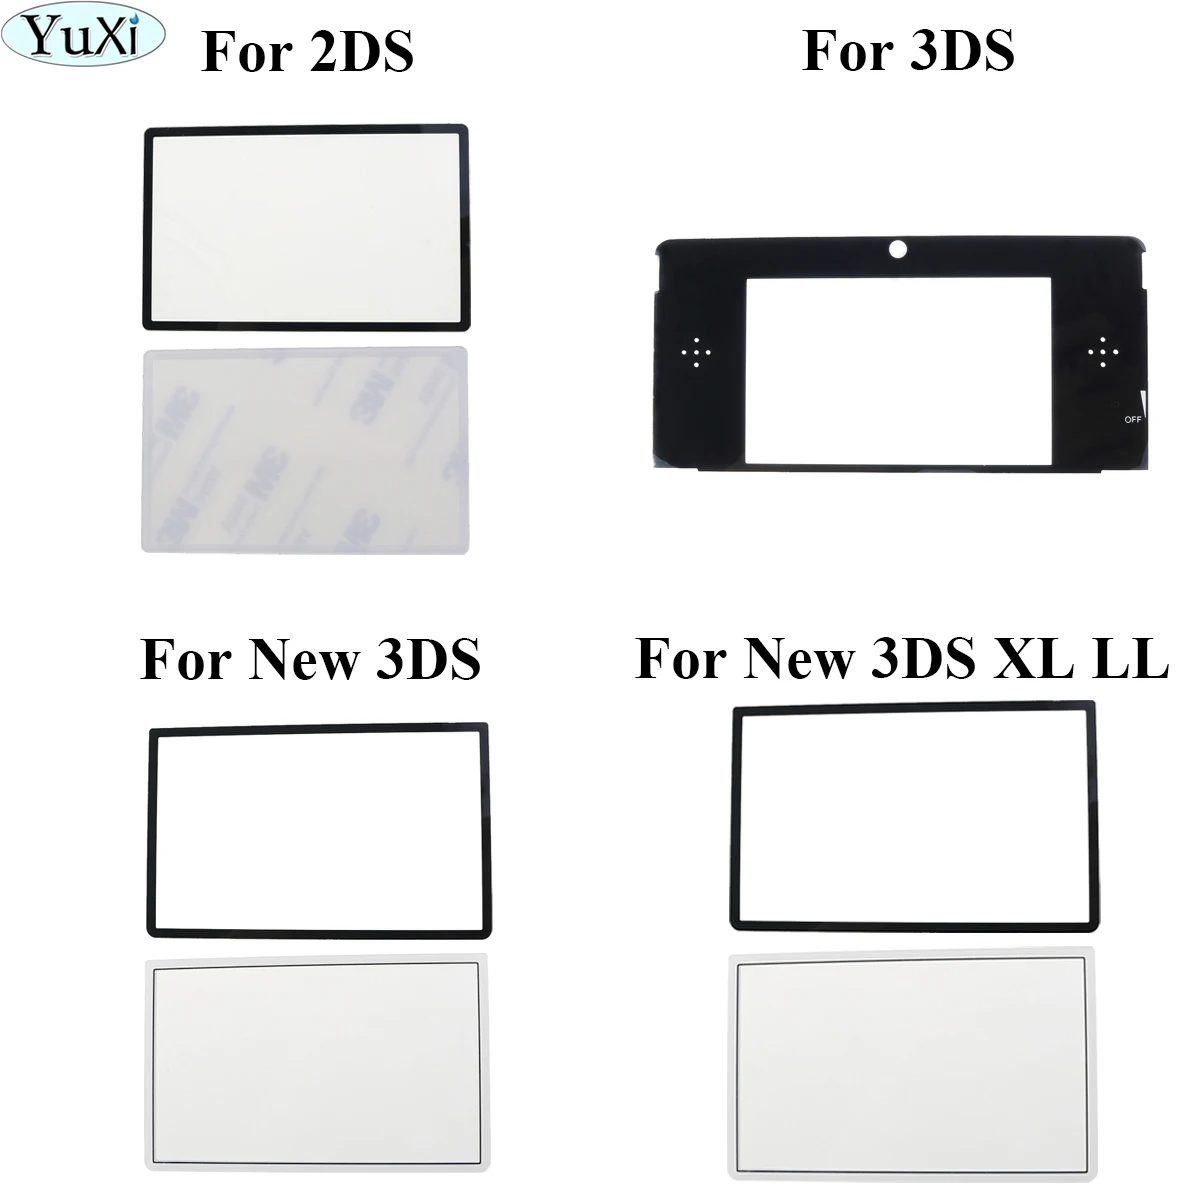 

YuXi 1pcs For Nintend New 3DS XL LL 2DS Screen Cover LCD Lens Clear For 2DS / New3DS